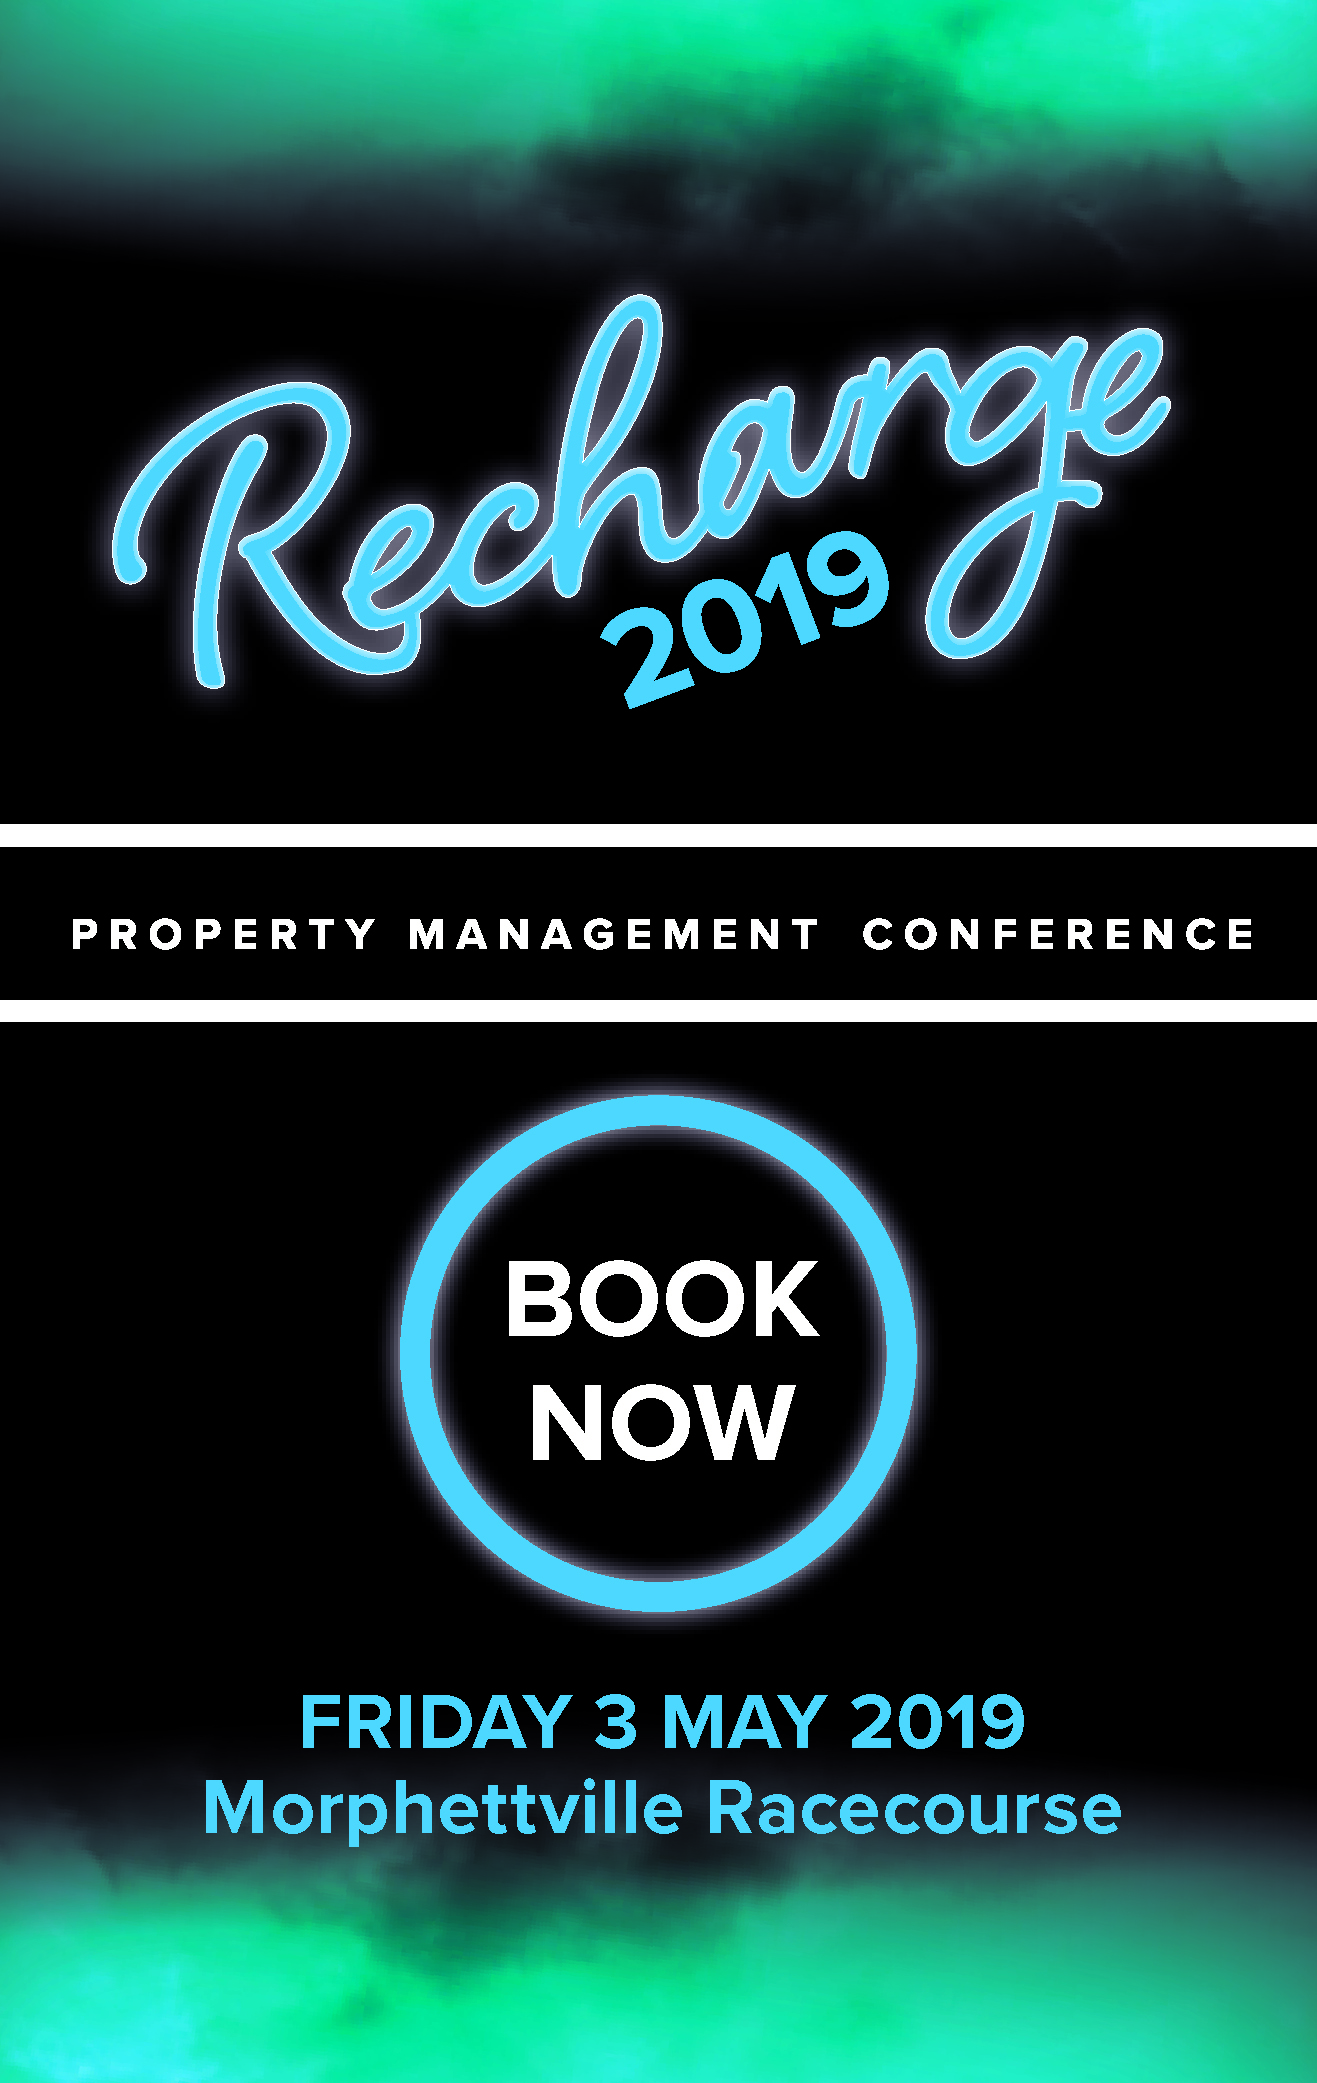 PM Conference Book Now - Side Banner